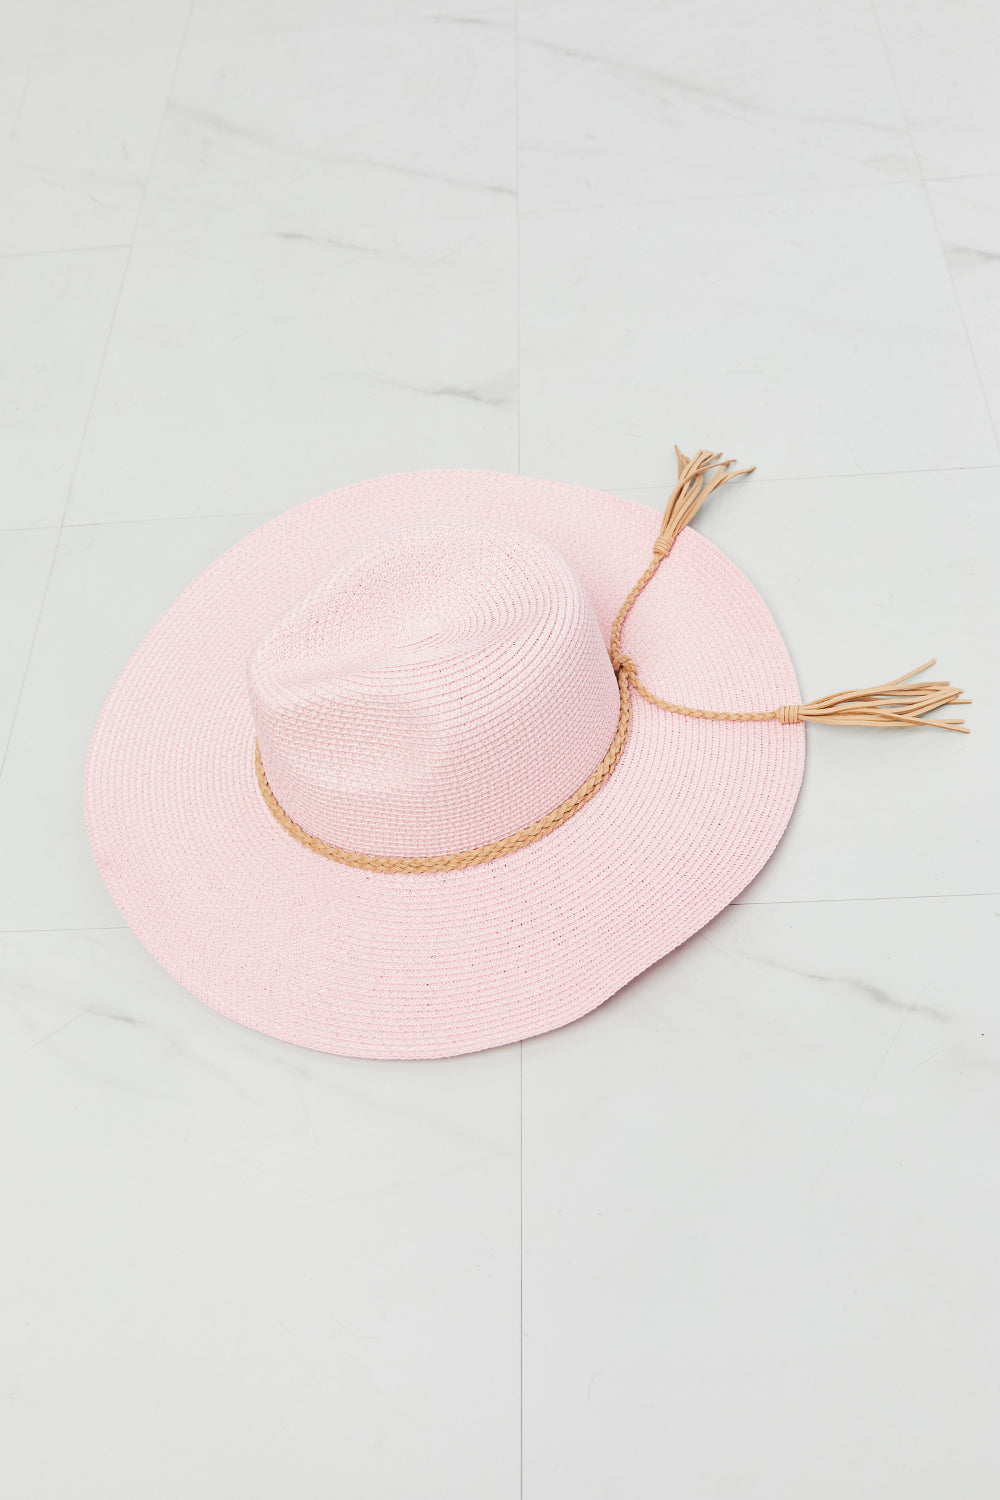 Fame Route To Paradise Straw Hat - Zara-Craft